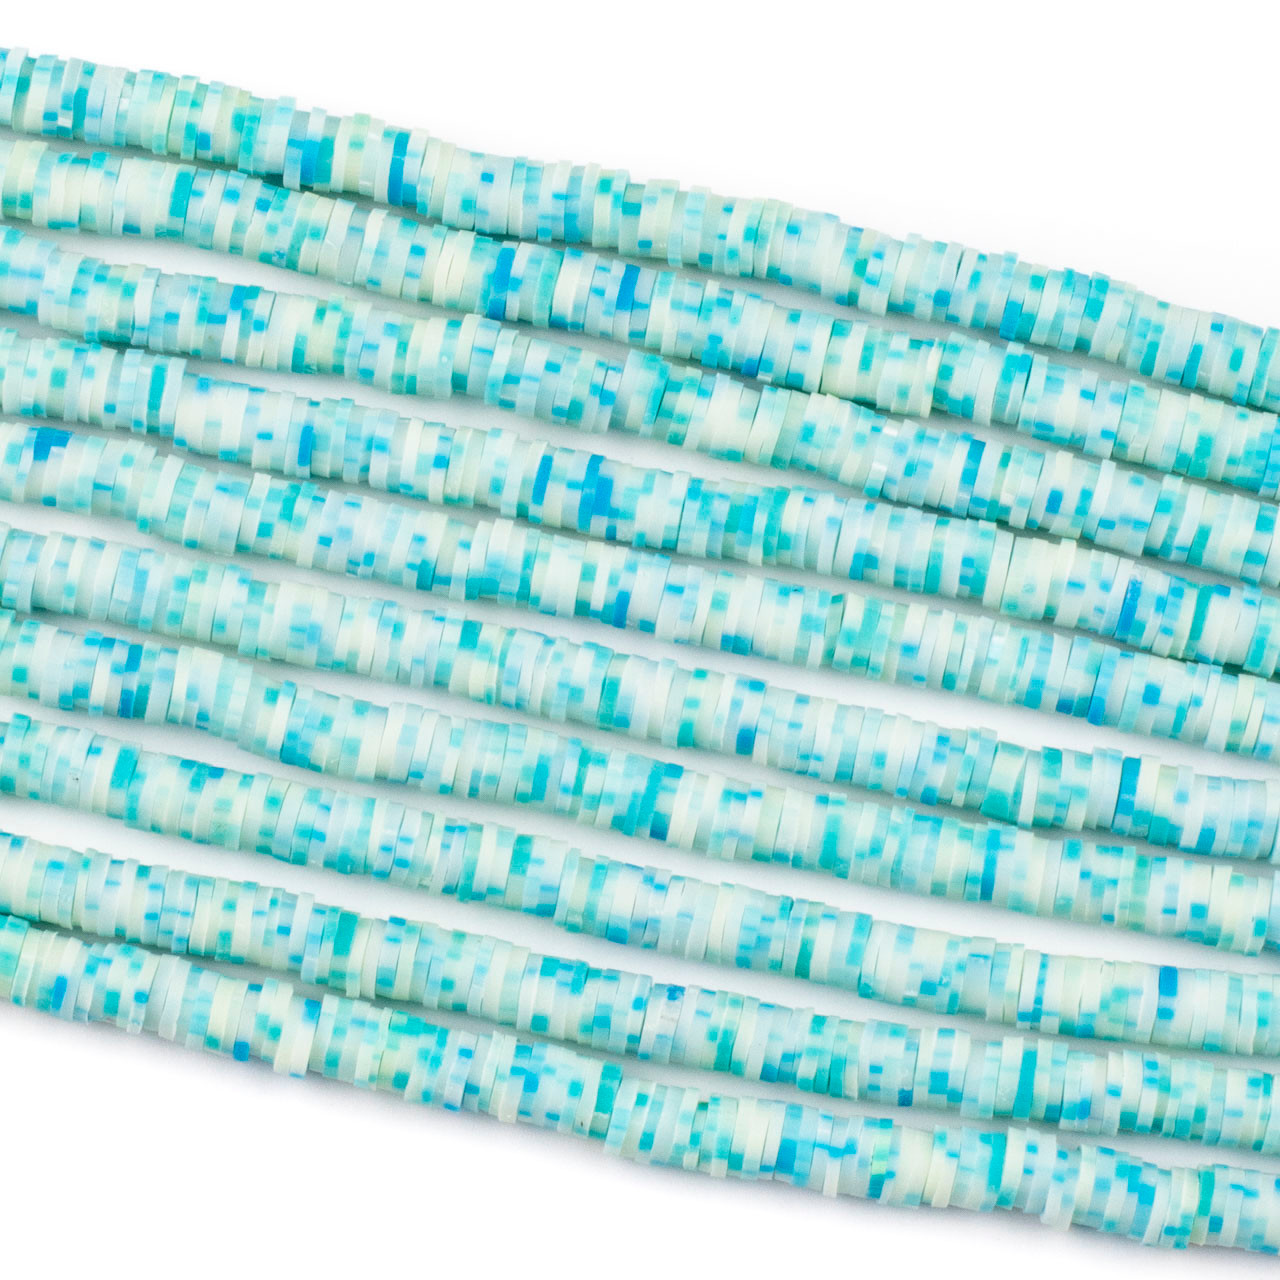 Polymer Clay 1x6mm Heishi Beads - Teal & White Pixels Mix #59 15